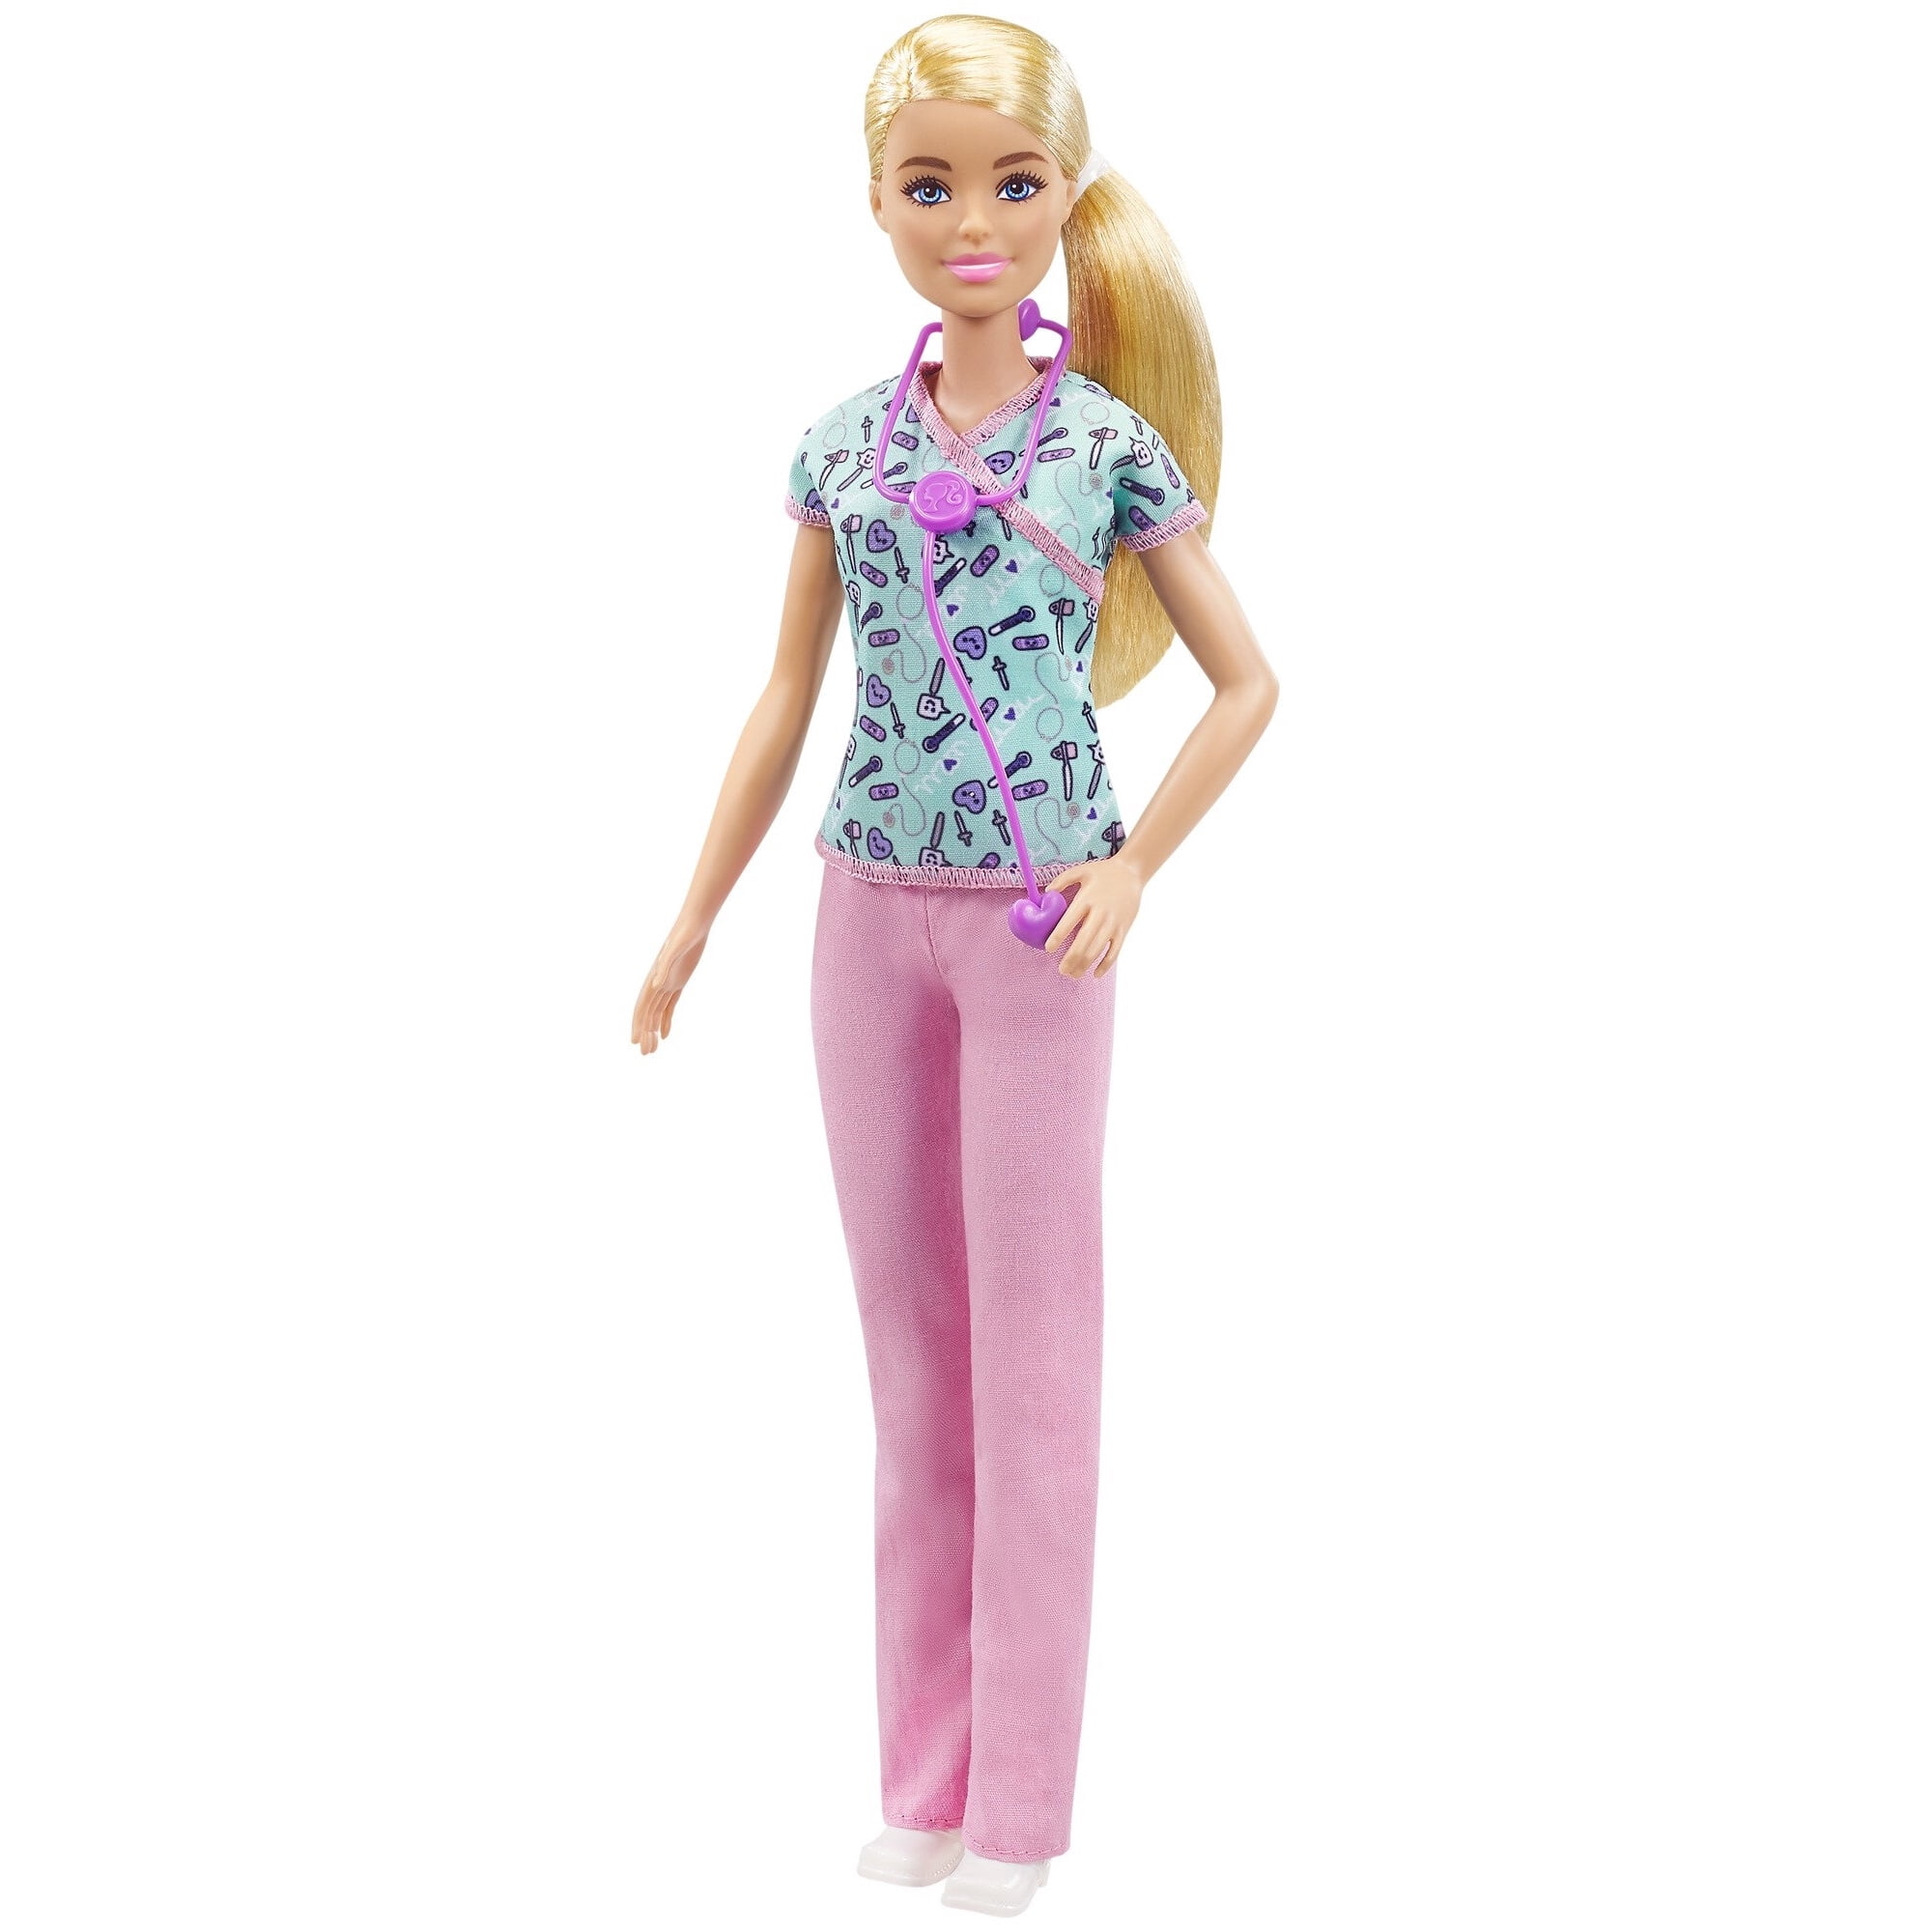 Barbie Nurse Fashion Doll Dressed in Medical Scrubs, White Shoes & Stethoscope Accessory